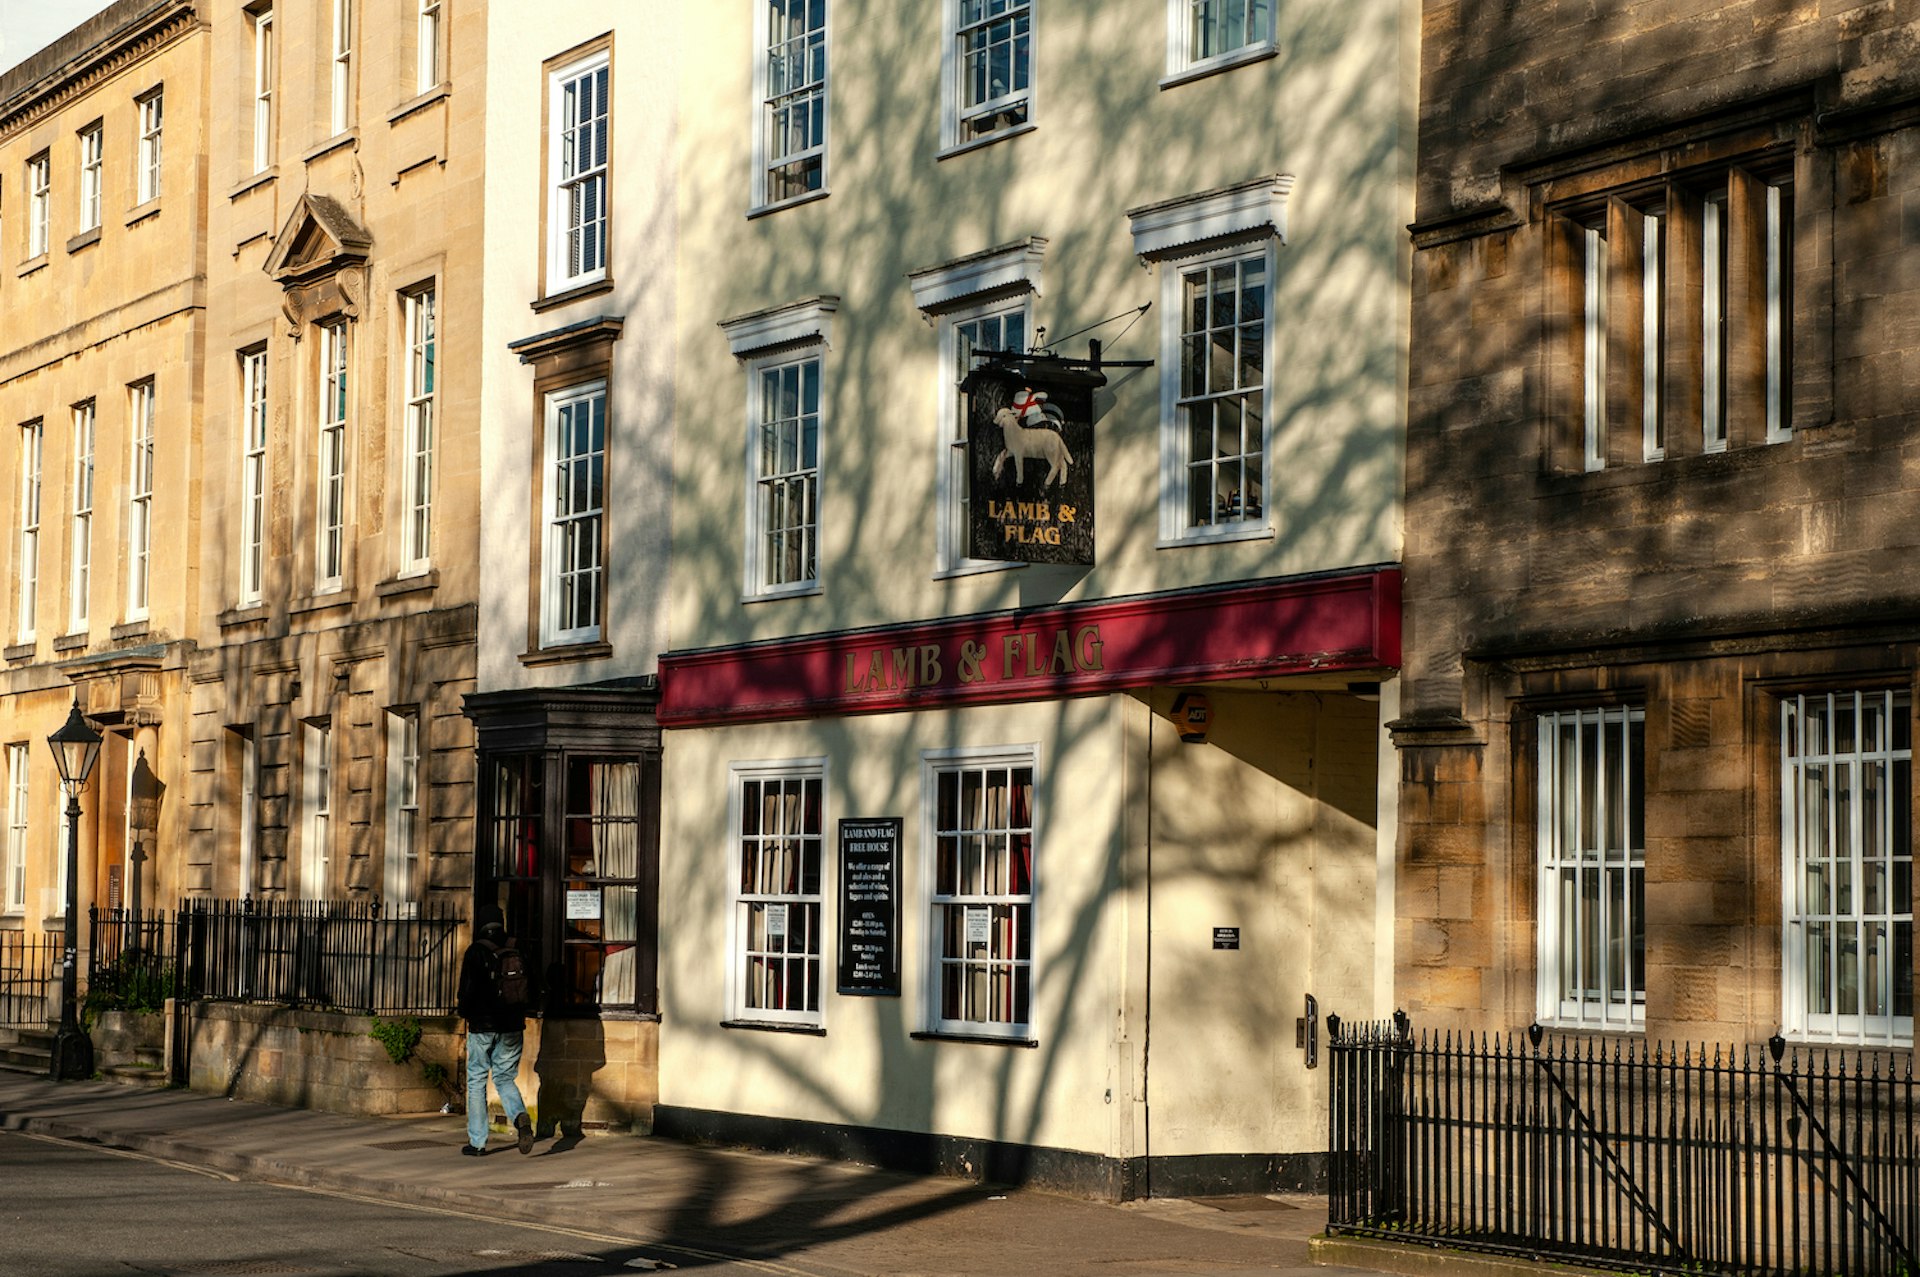 The exterior of the Lamb & Flag pub on St Giles’ street in the city center of Oxford, Oxfordshire, England, United Kindom